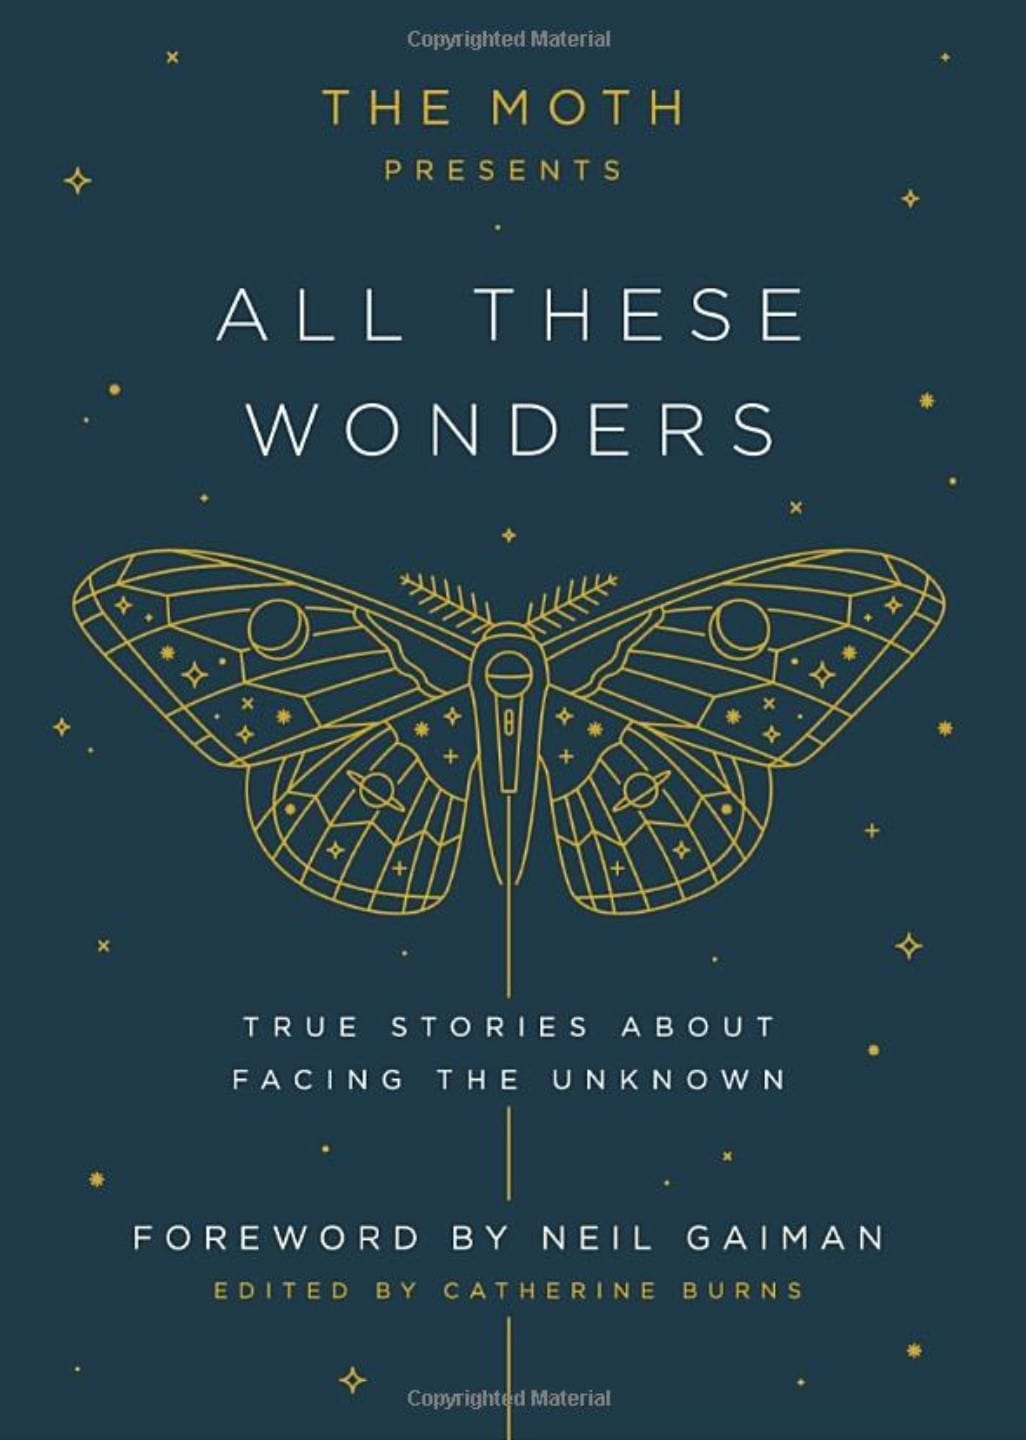 All These Wonders book cover